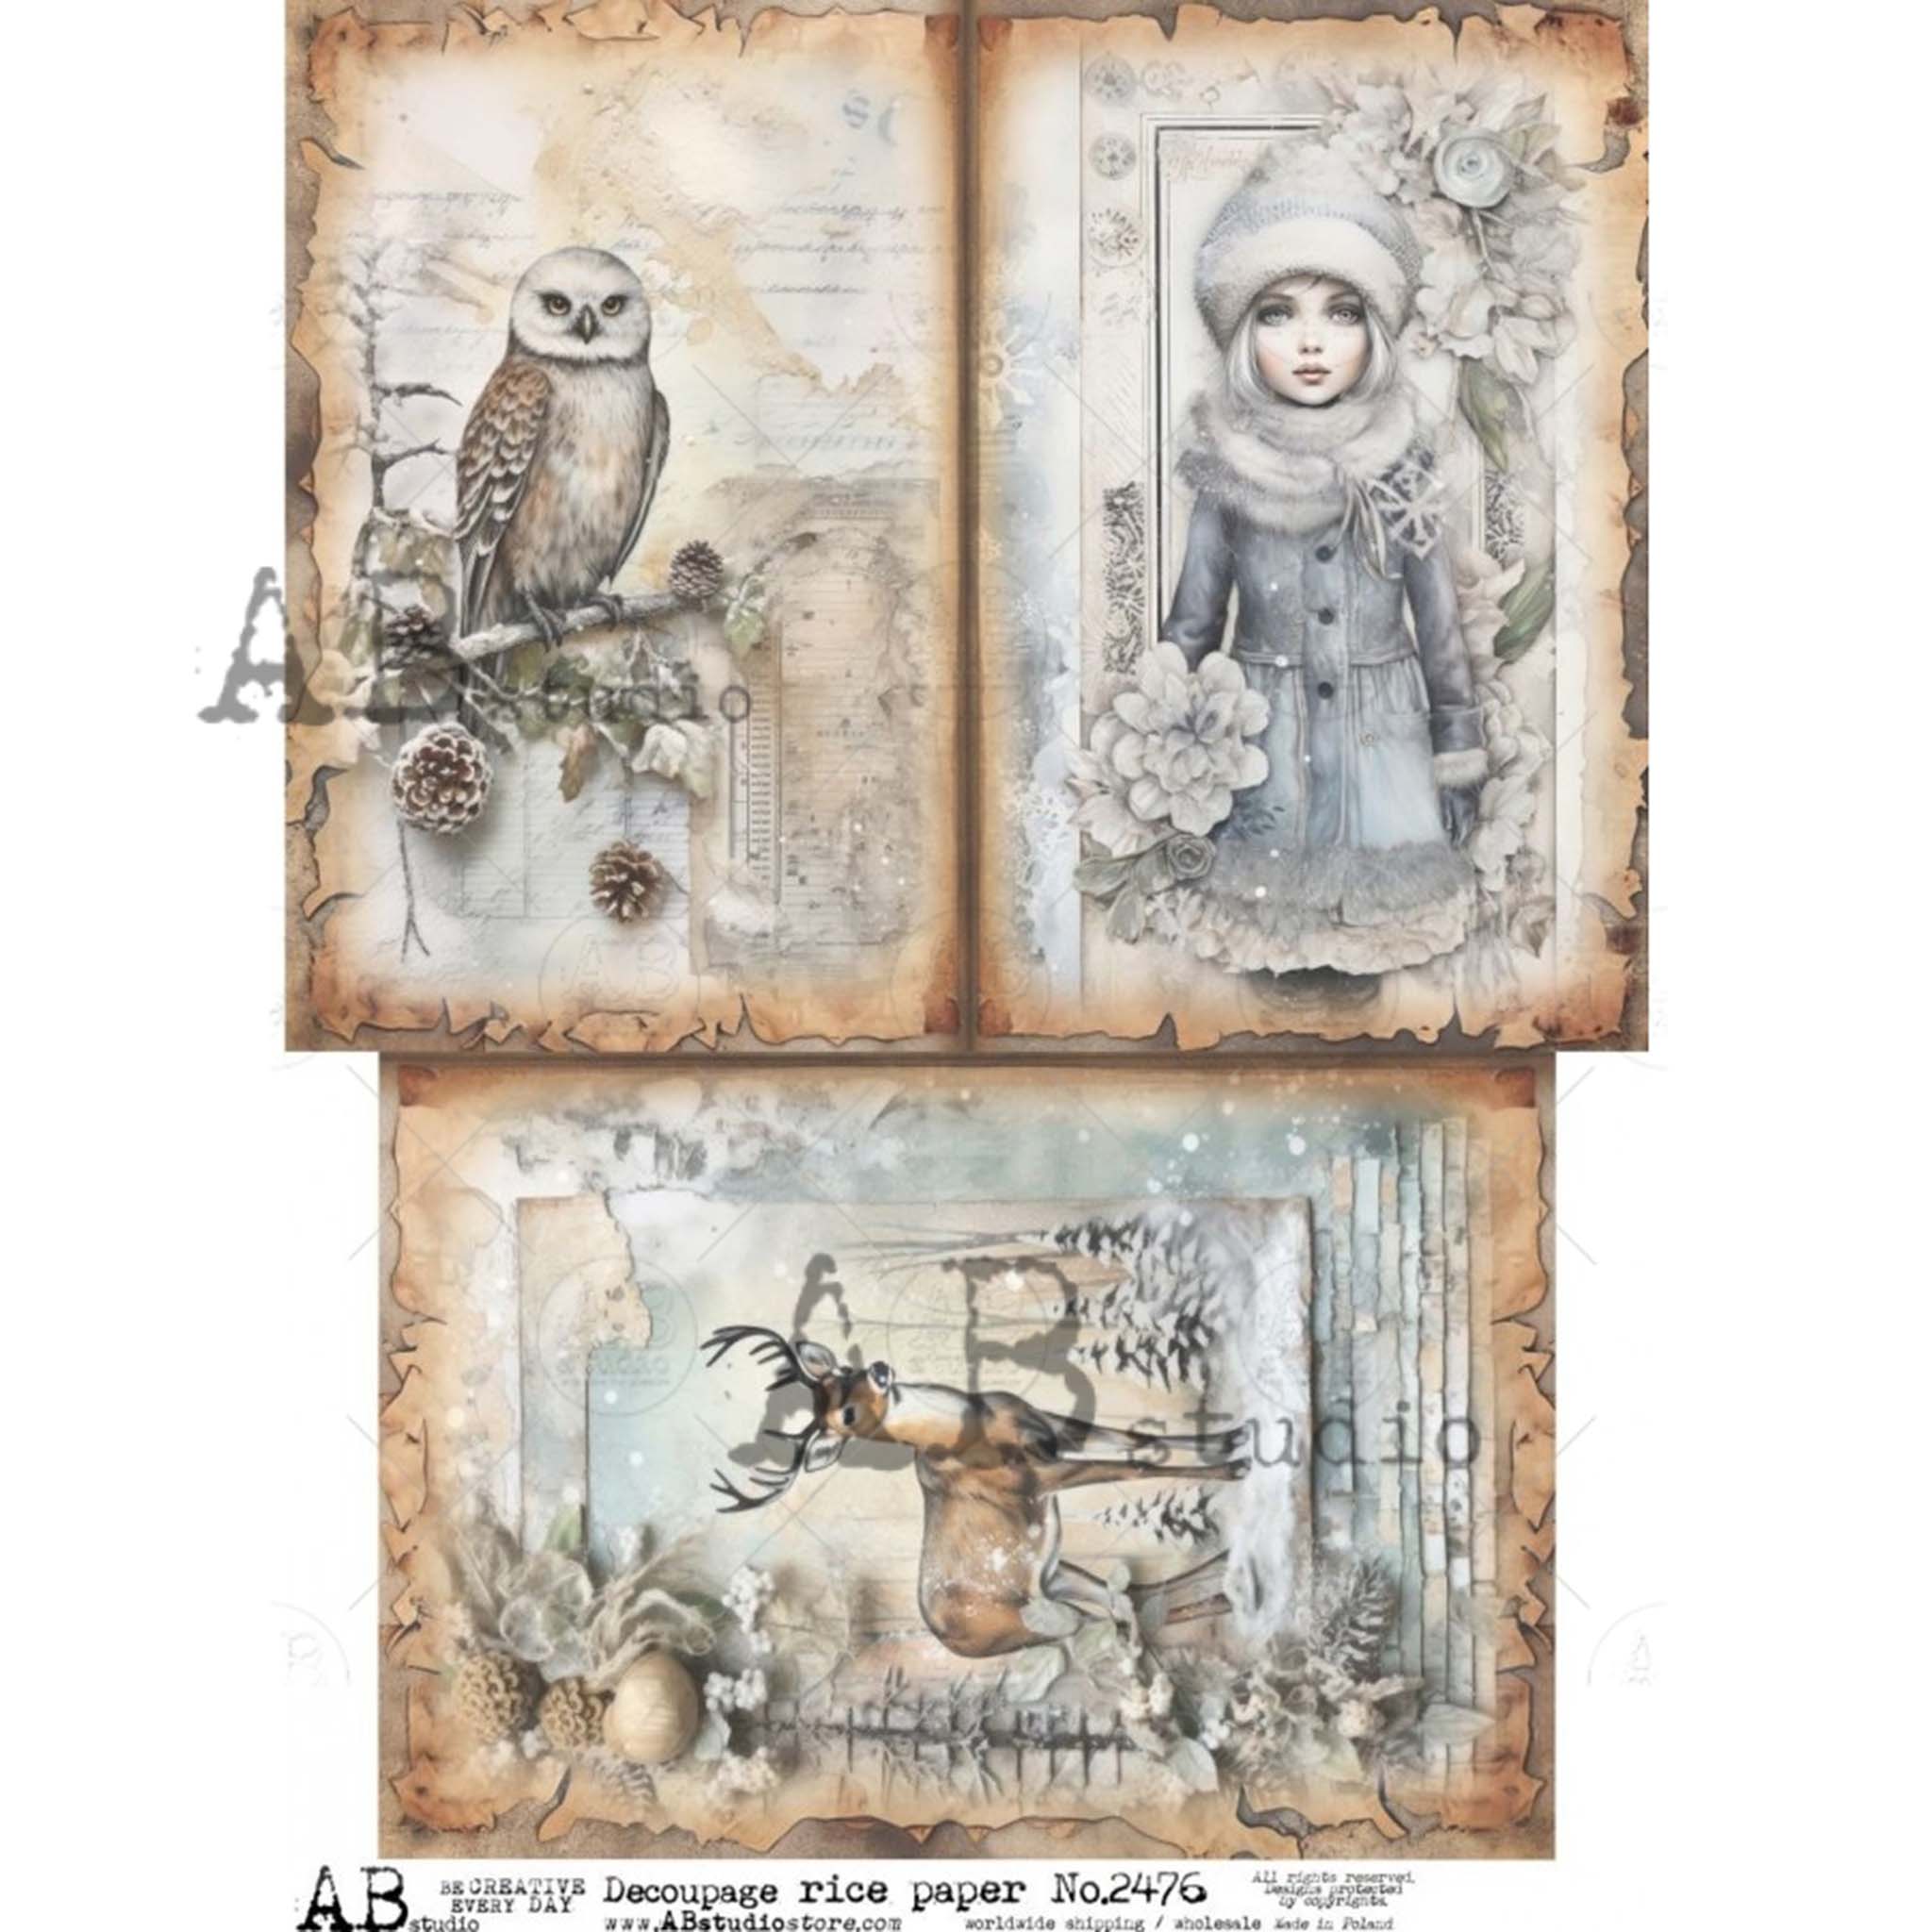 An A4 rice paper of three postcard style designs featuring a wise owl, a bundled little girl, and a sweet deer is against a white background.